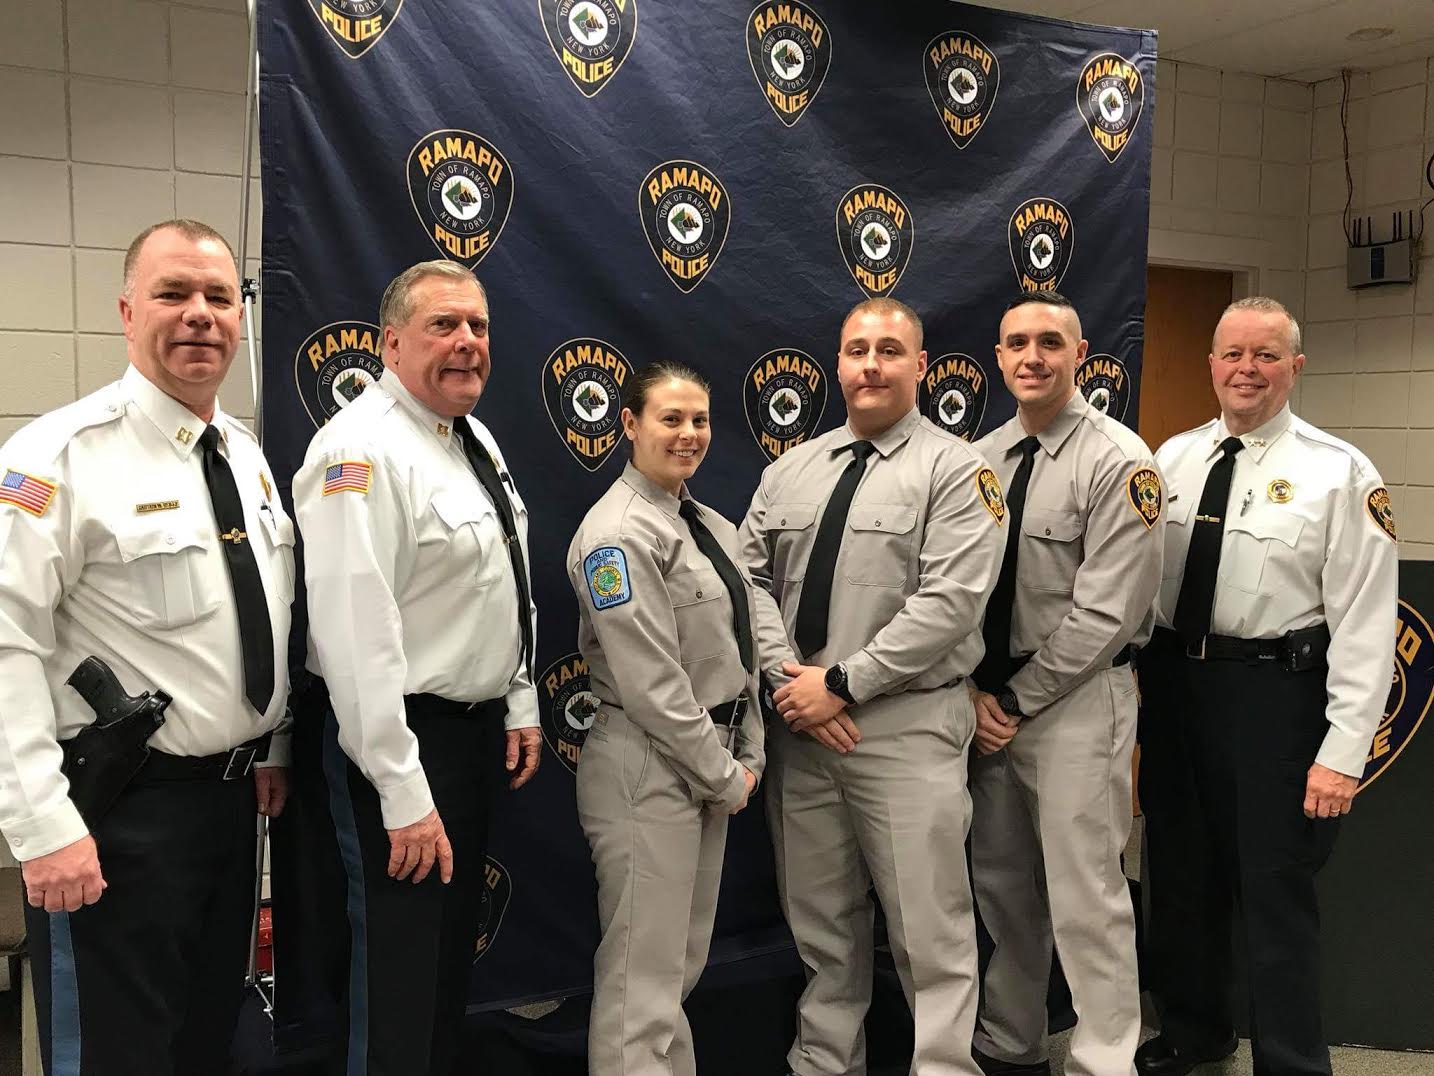 Three new officers in Ramapo